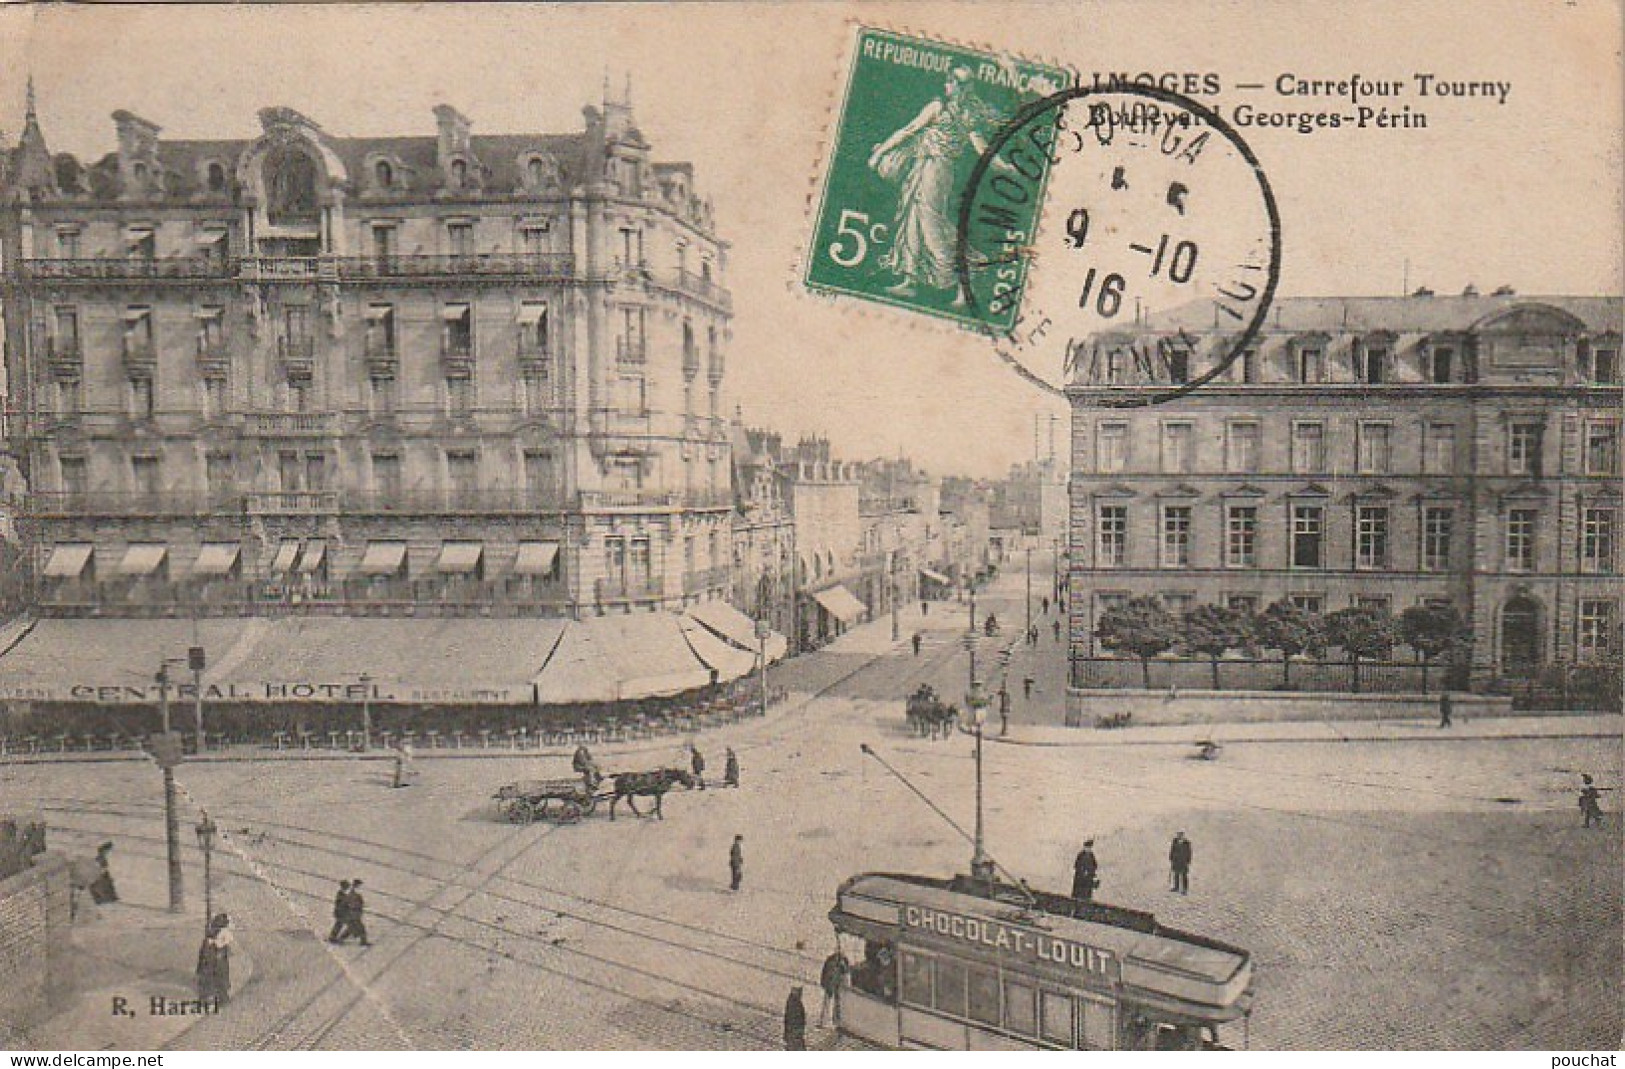 XXX -(87) LIMOGES - CARREFOUR TOURNY- BOULEVARD GEORGES PERRIN - ANIMATION - TRAMWAY - 2 SCANS - Limoges